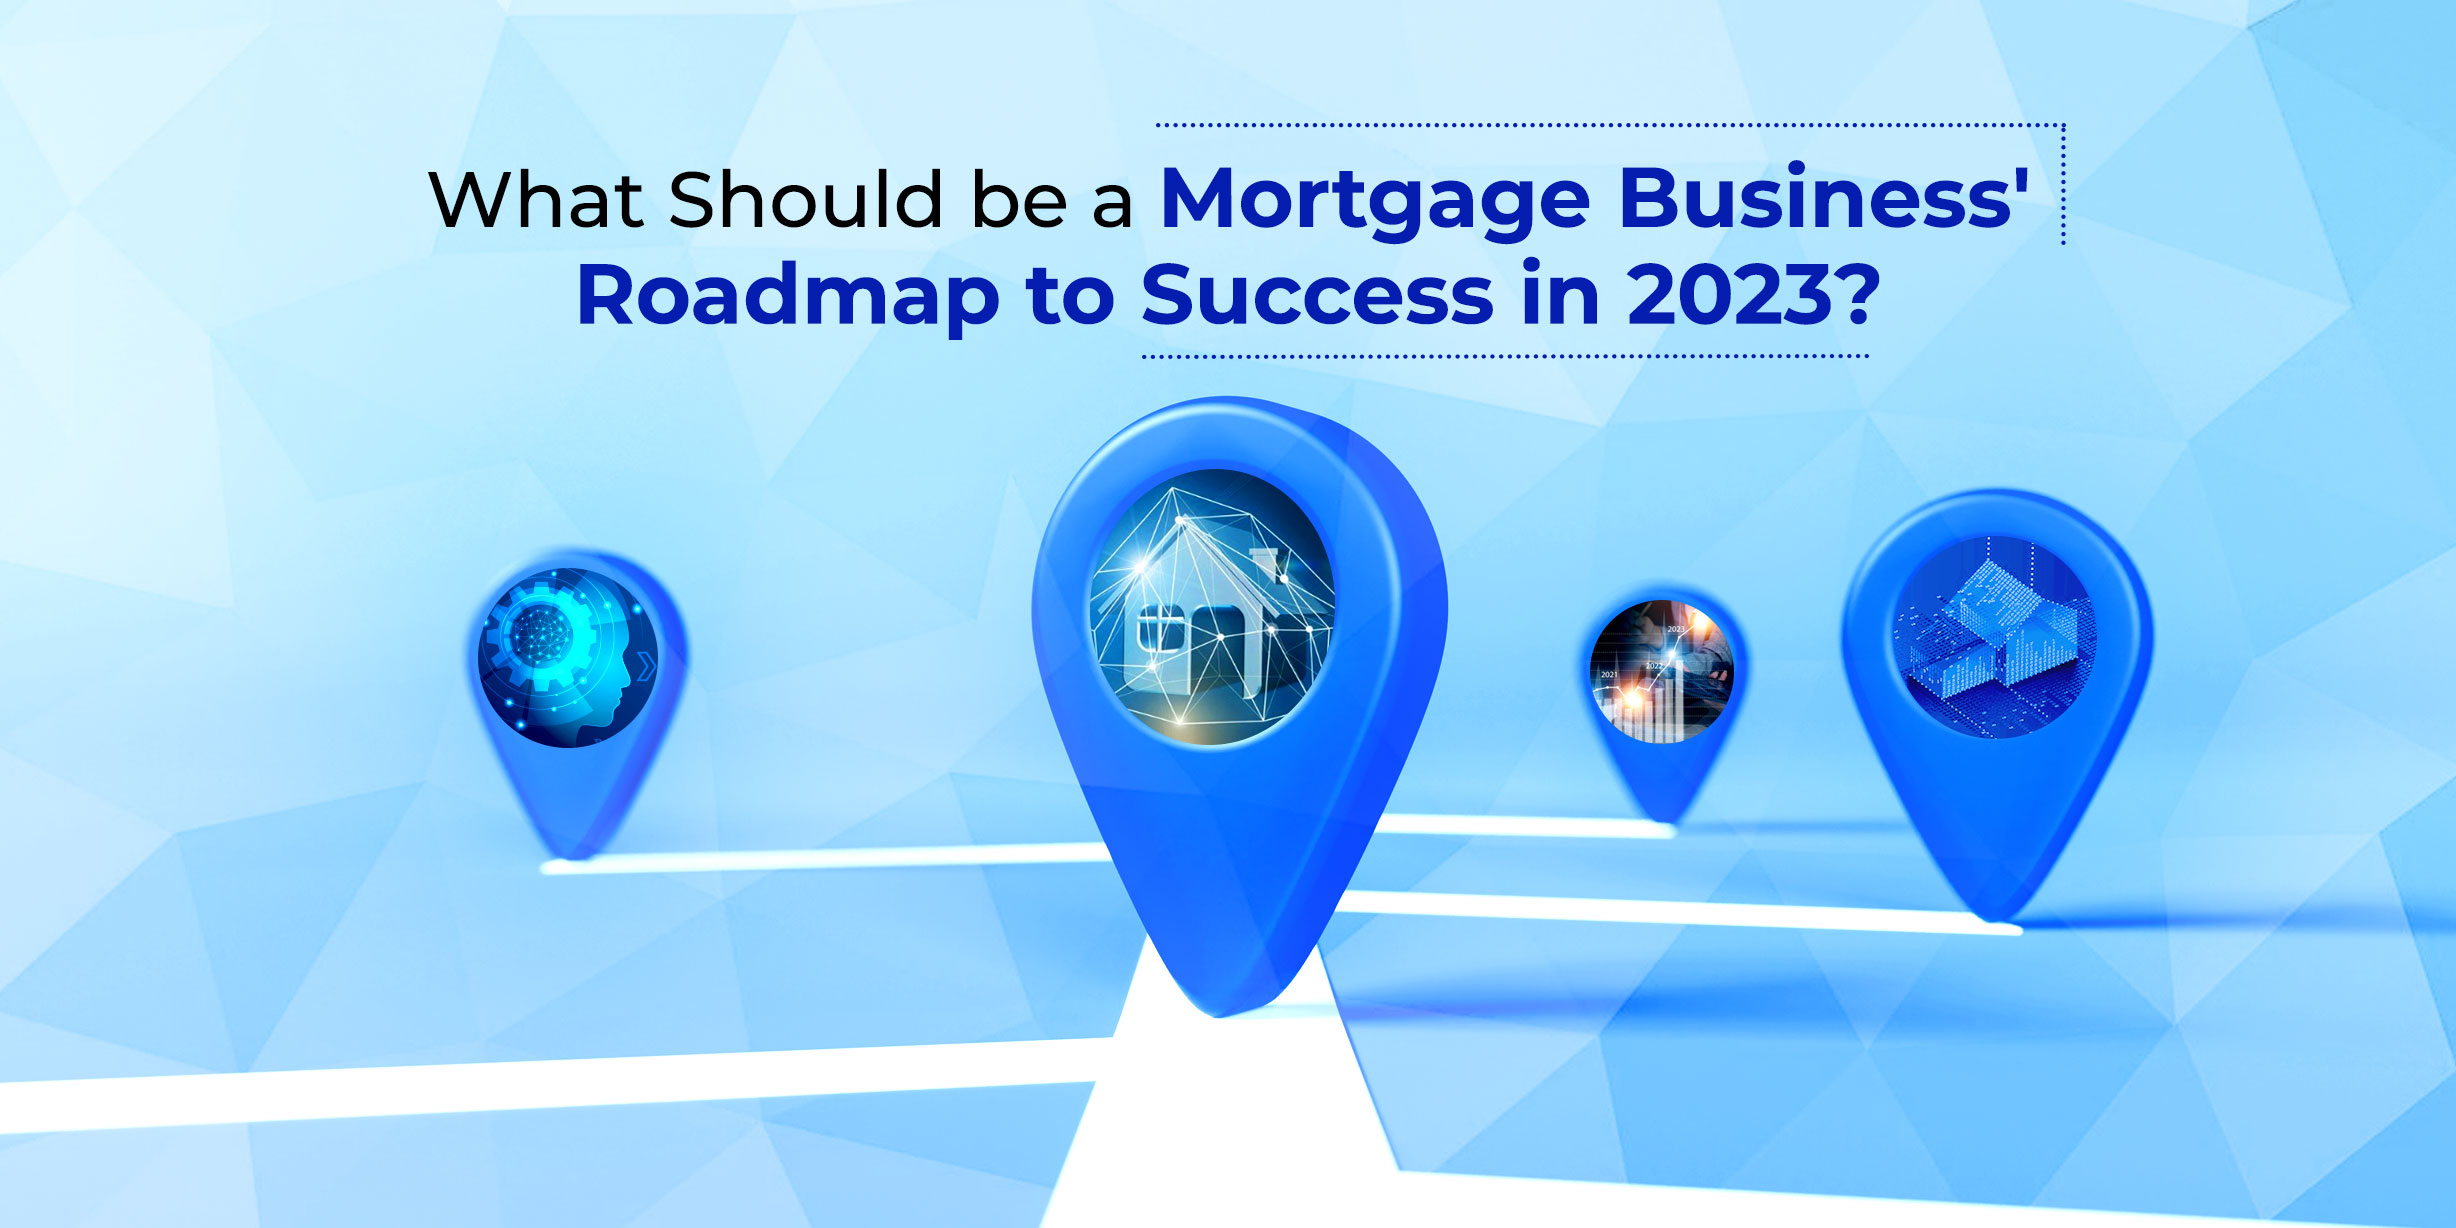 What Should be a Mortgage Business' Roadmap to Success in 2023?